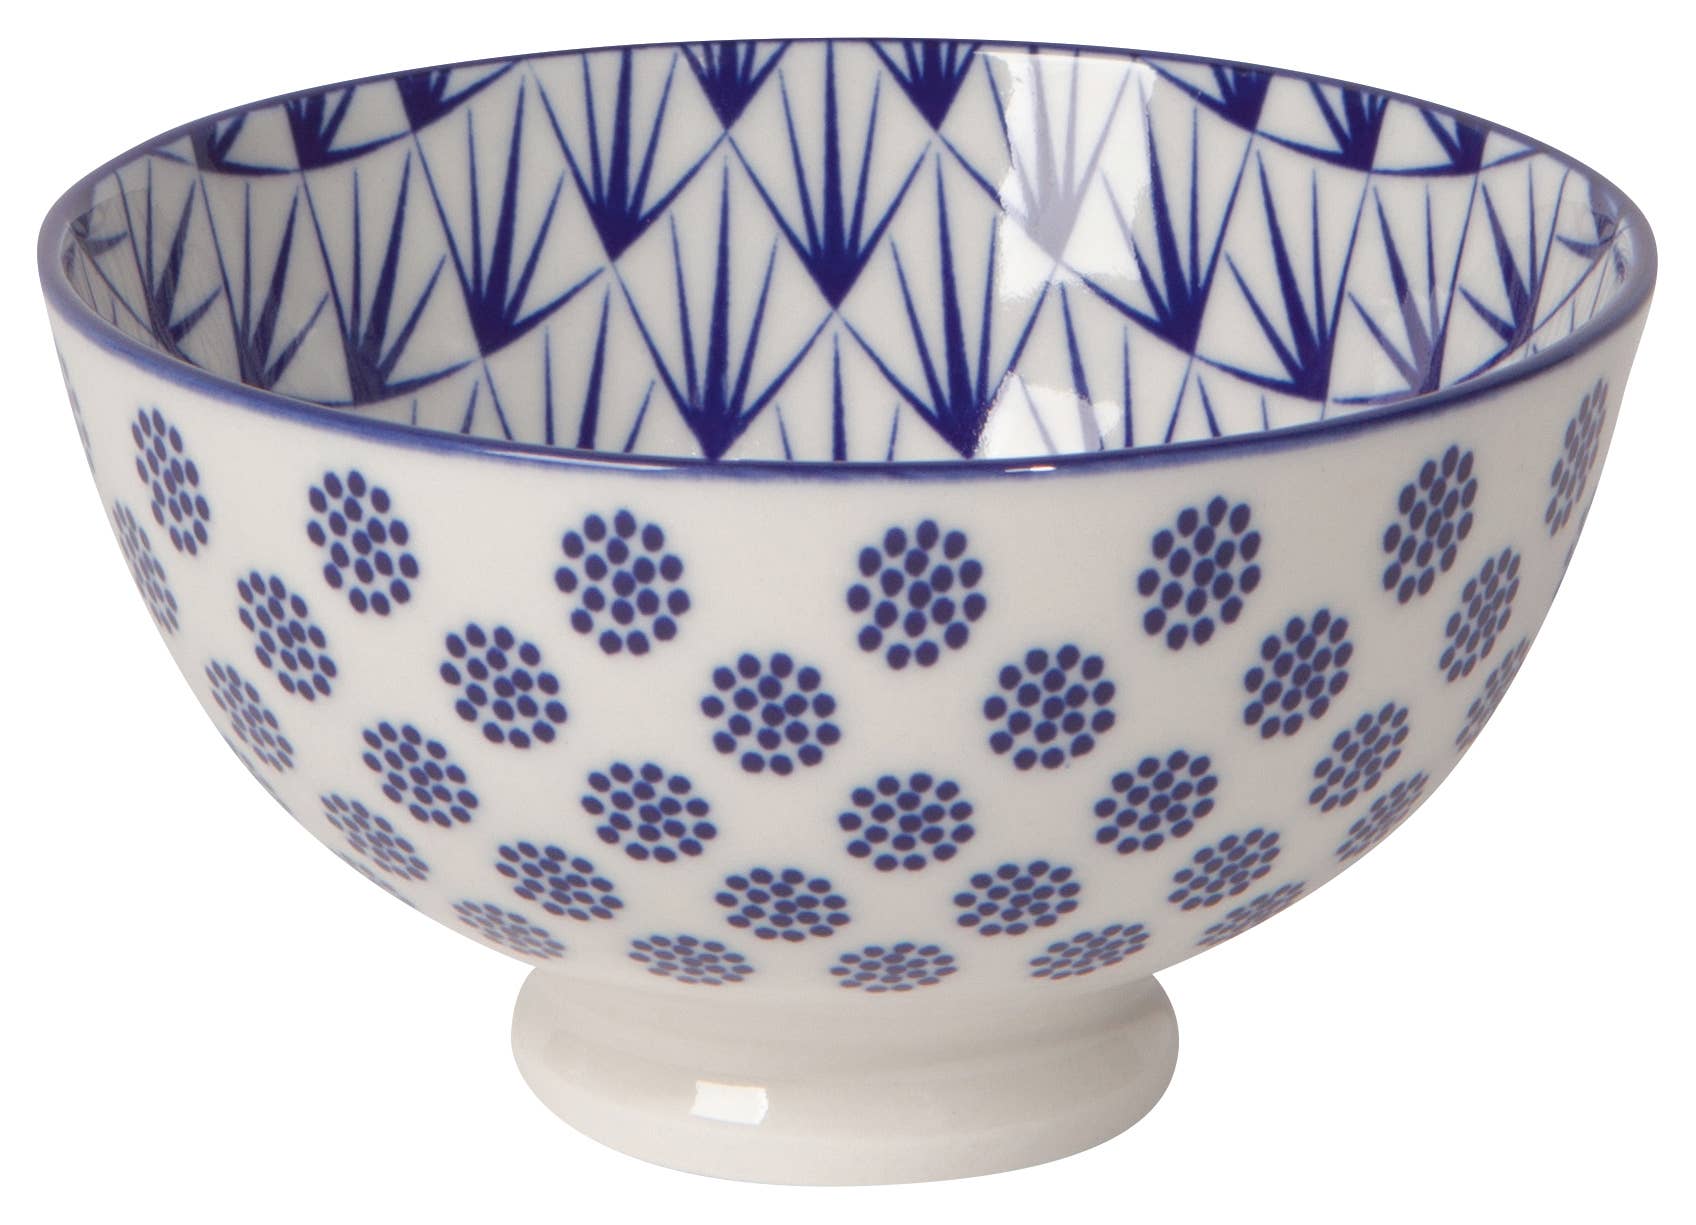 Now Designs by Danica - Blue Dots Stamped Bowl 4 inch